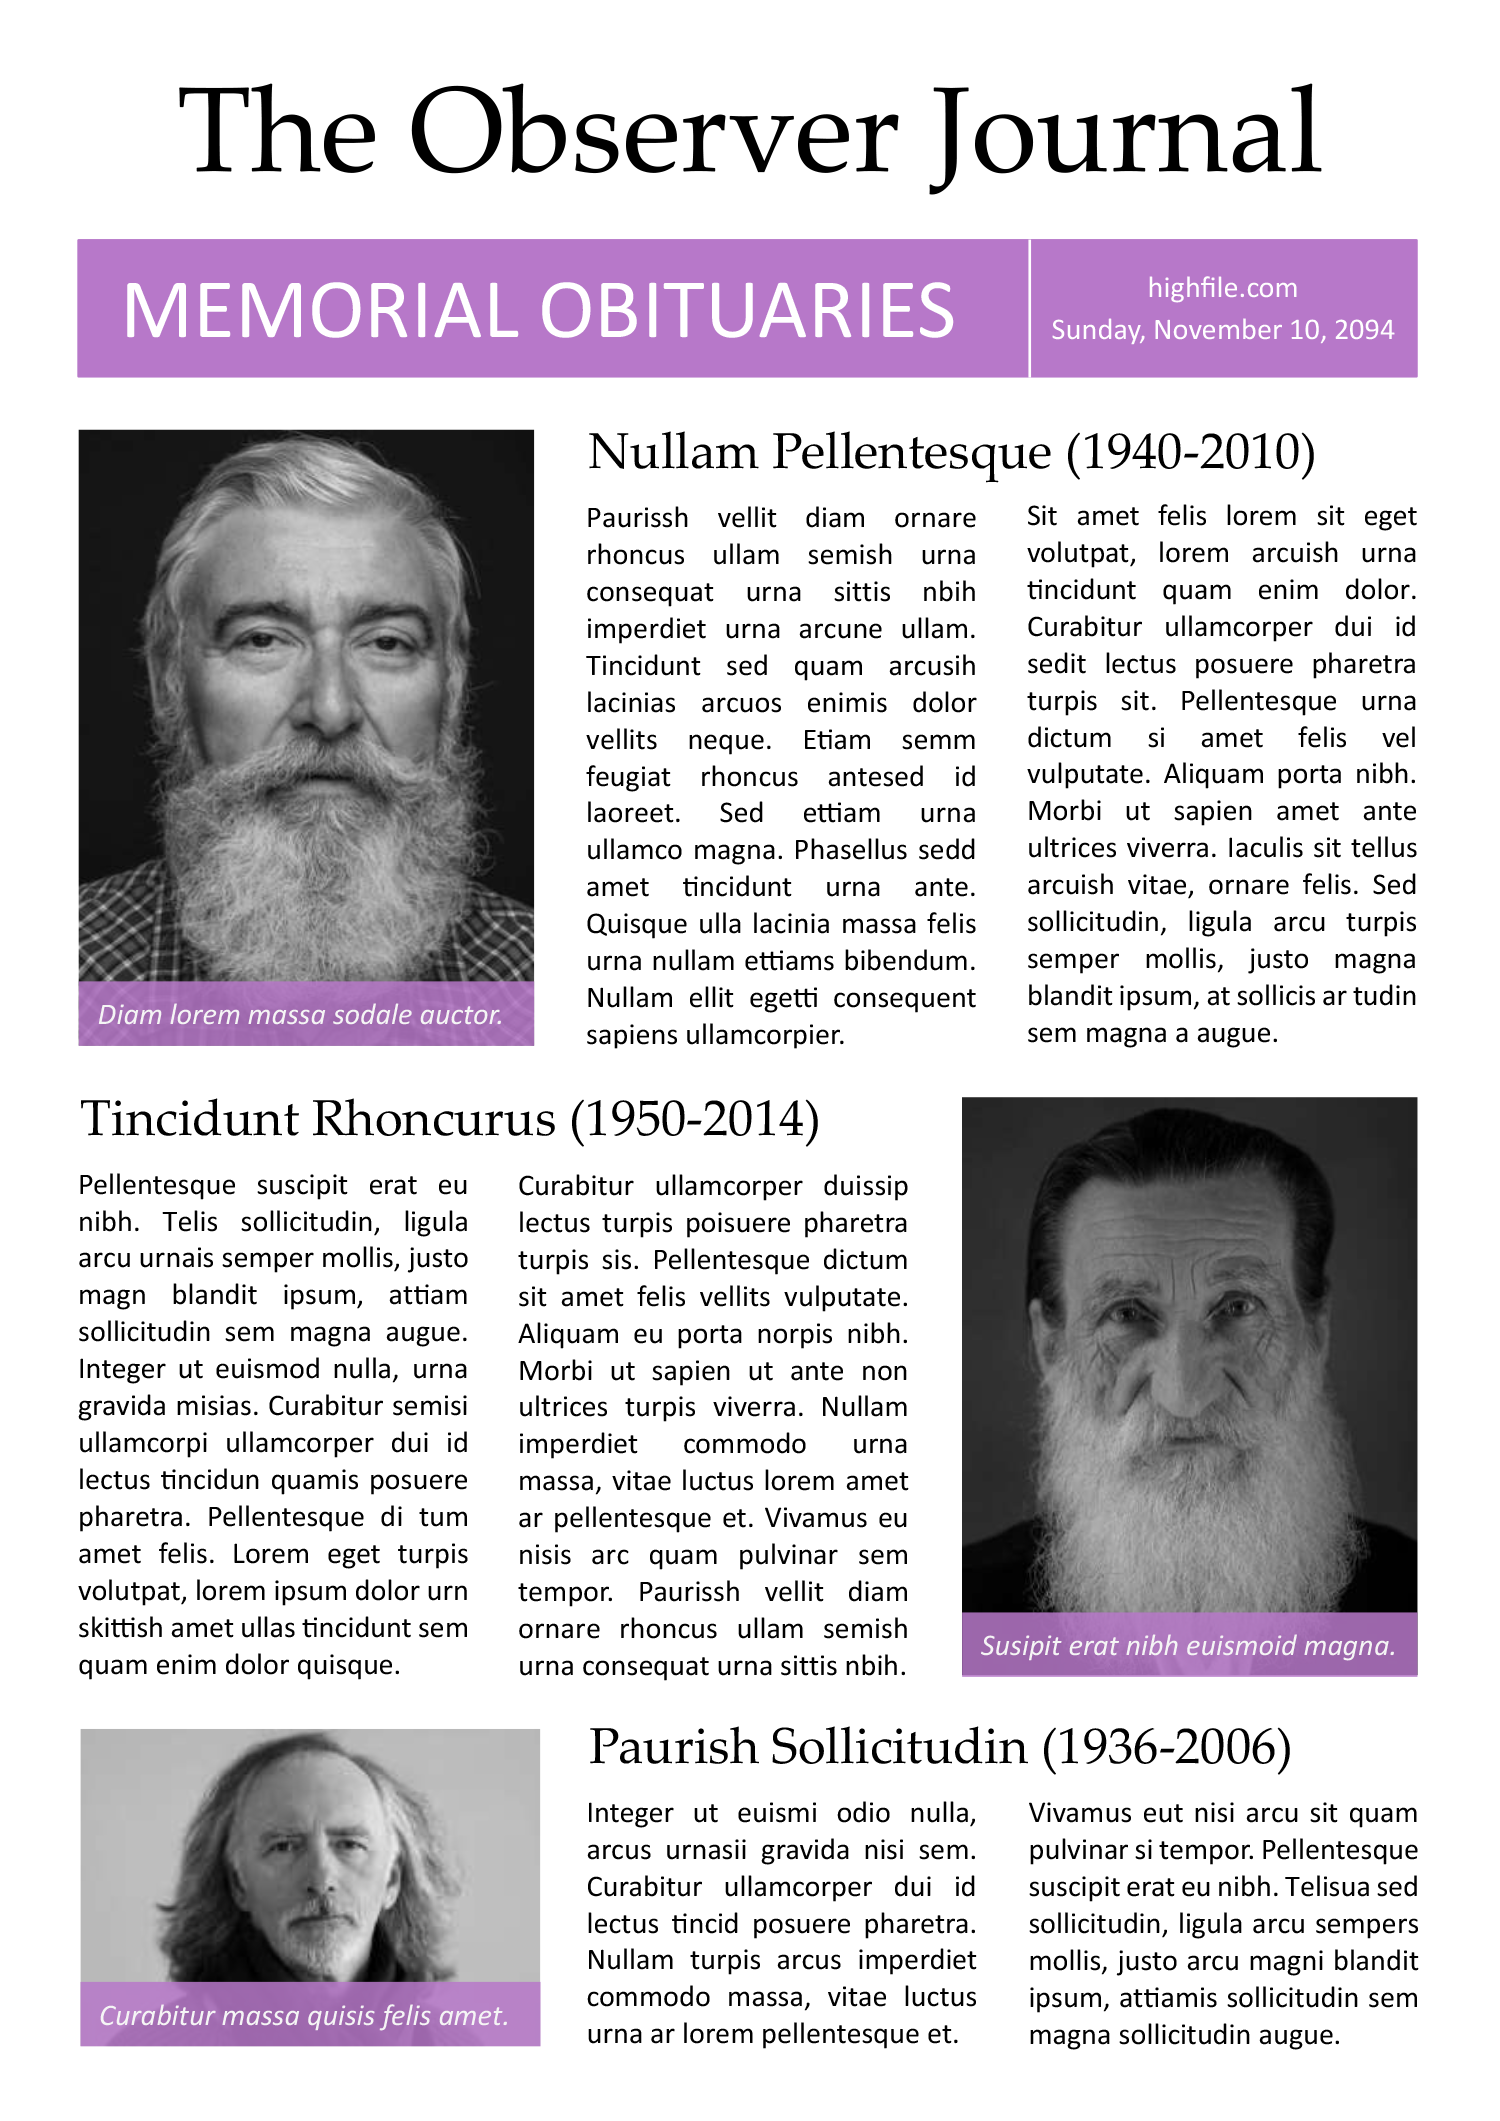 Classic A4 Newspaper Obituary Page Template - Front Page